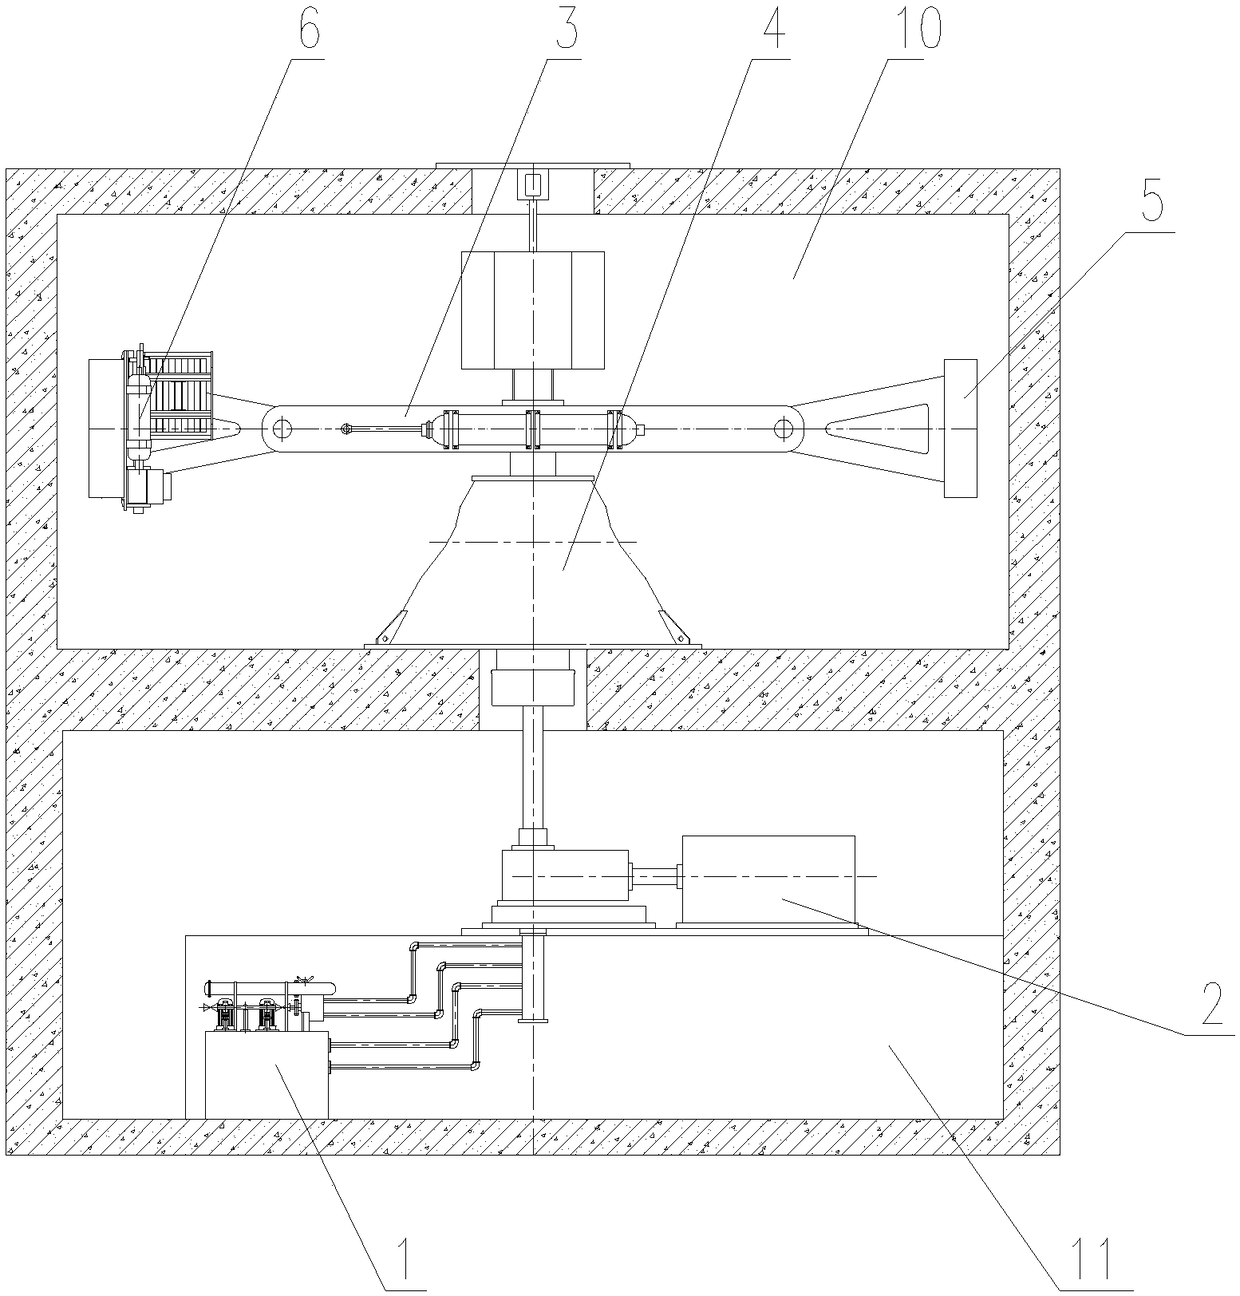 Large-load high-frequency-response electro-hydraulic servo vibration device working under highly-centrifugal field